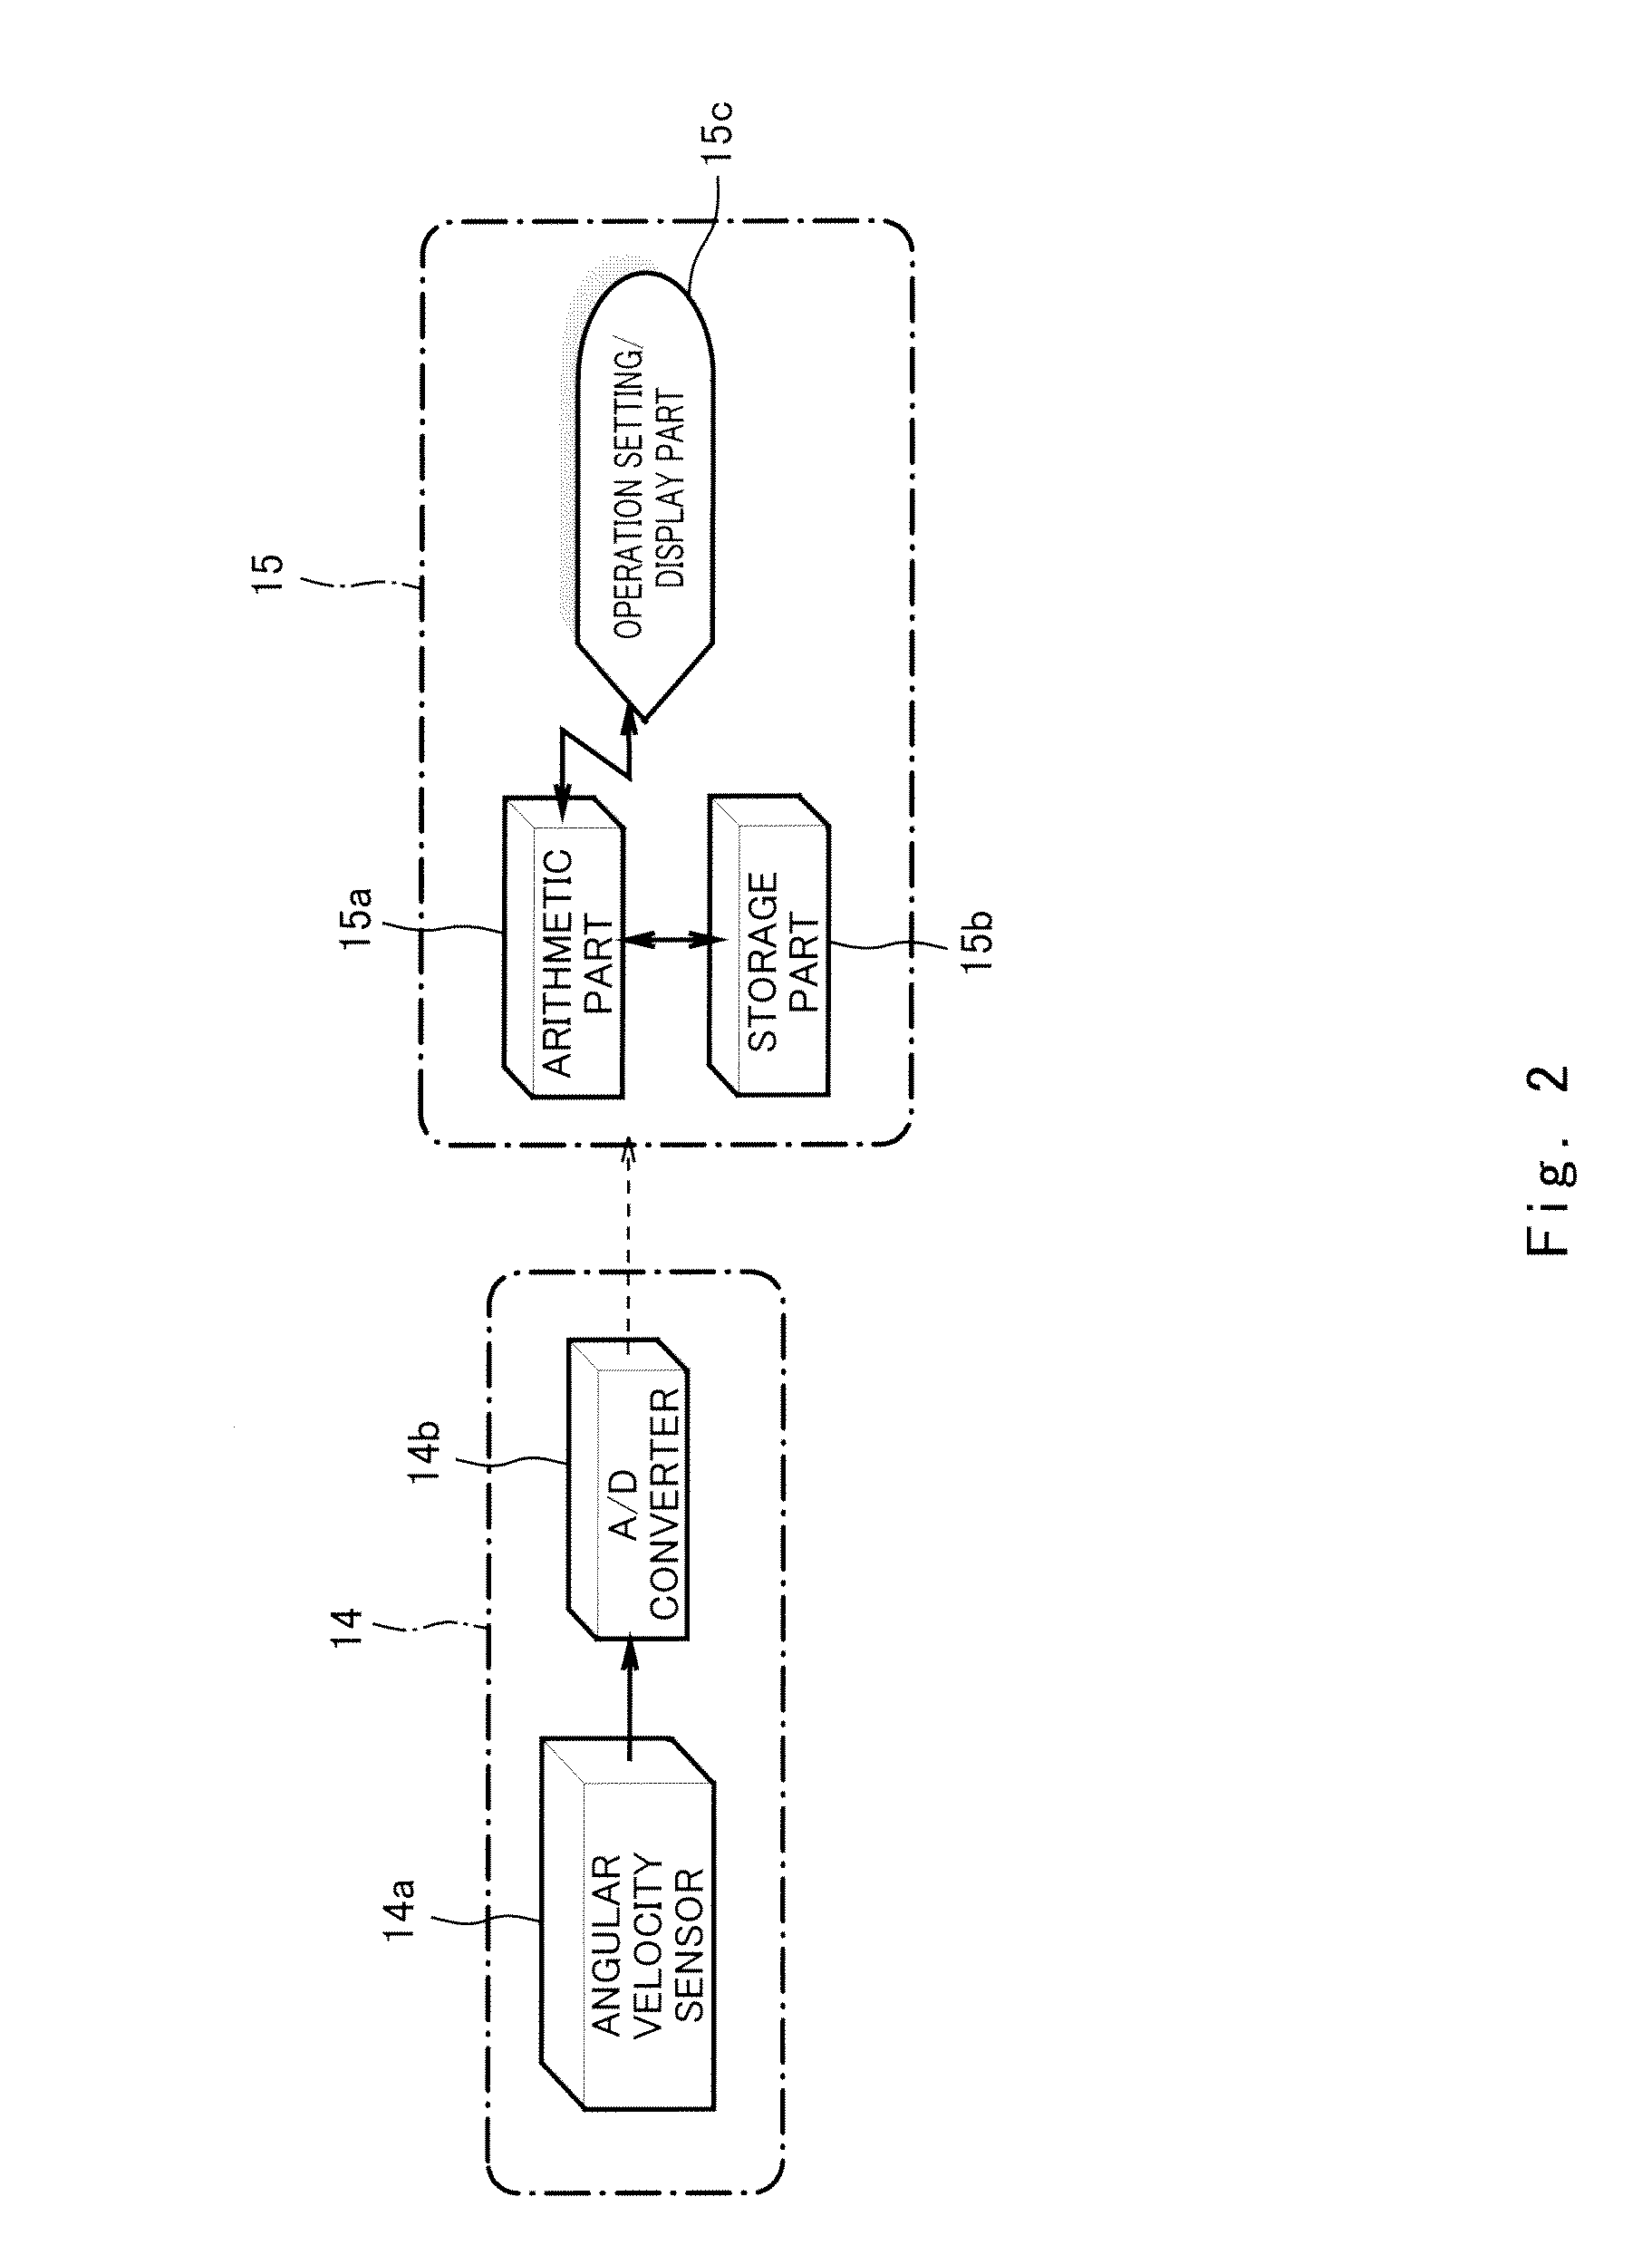 System for detecting or estimating center-of-gravity, lateral rollover limit or cargo weight